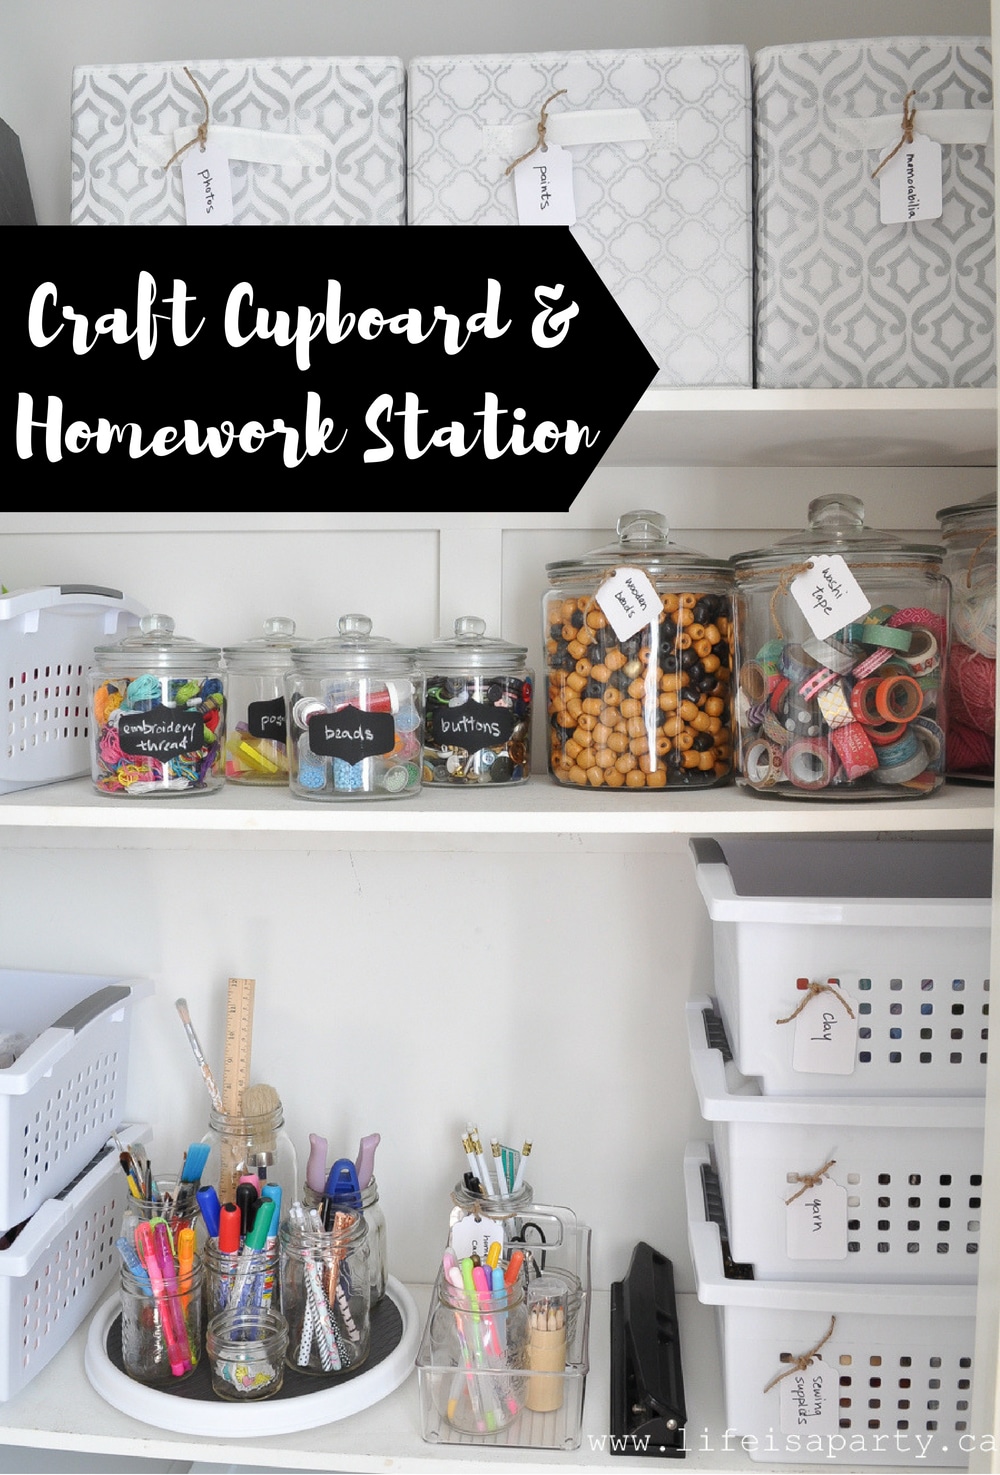 Craft Cupboard and Homework Station: see an old closet turned into an organized craft cupboard and homework station including a portable homework caddy.